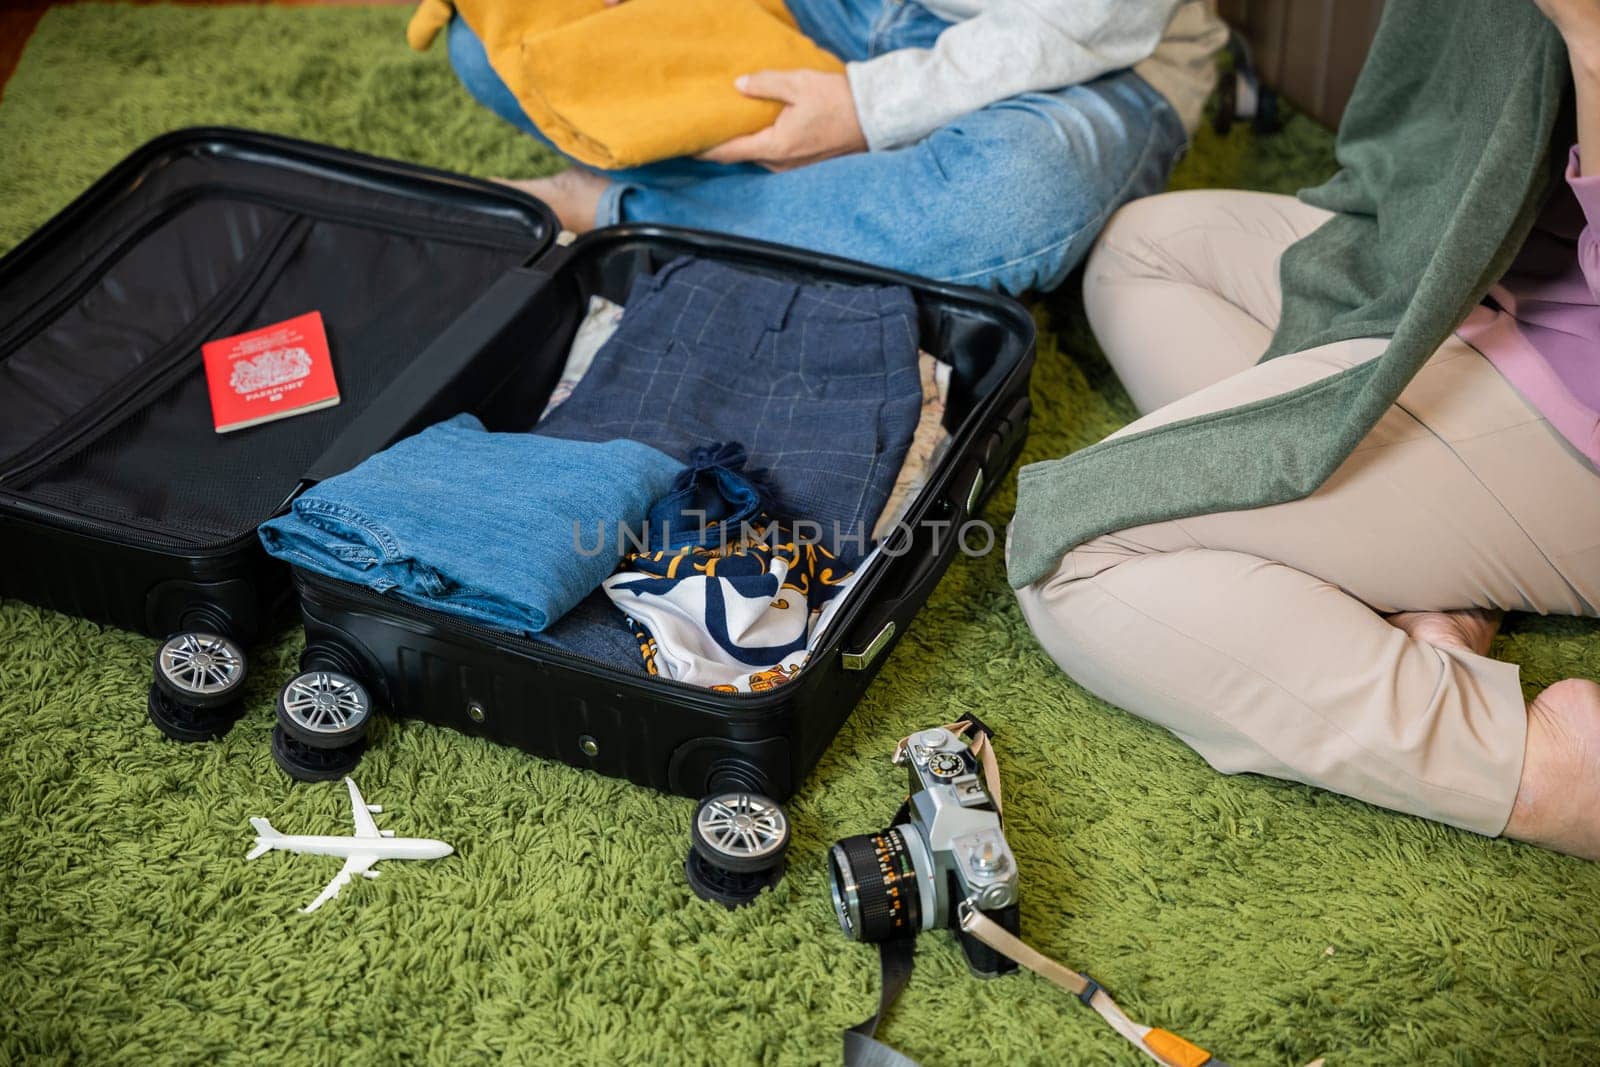 Asian couple old senior marry retired couple prepare luggage suitcase arranging for travel, Romantic retired packing clothes travel bag suitcase together on floor at home interior living room